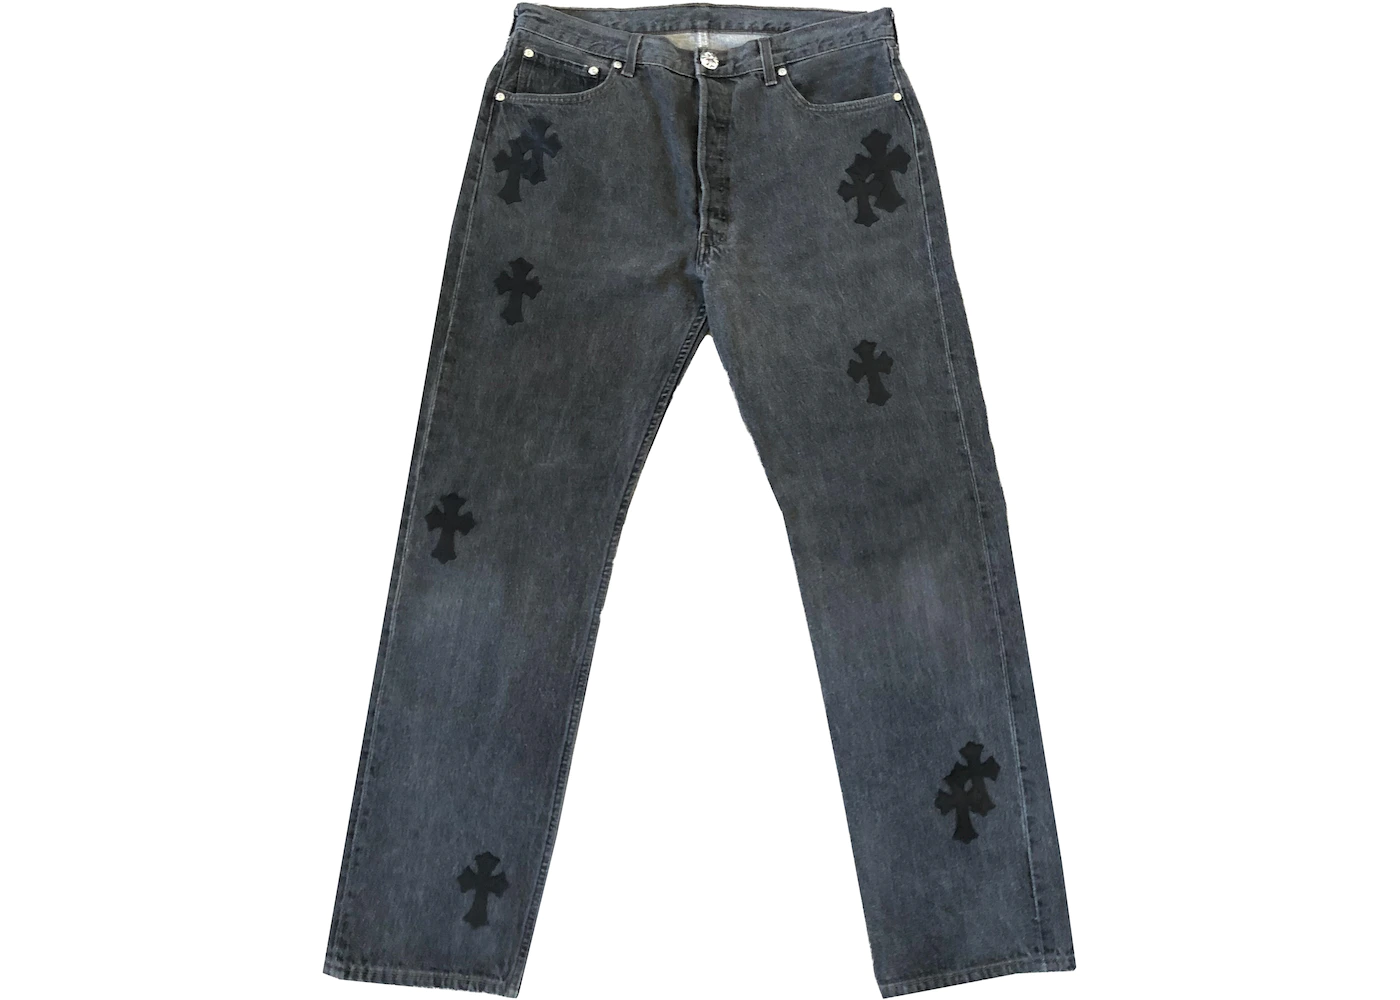 Discovering Chrome Hearts Jean